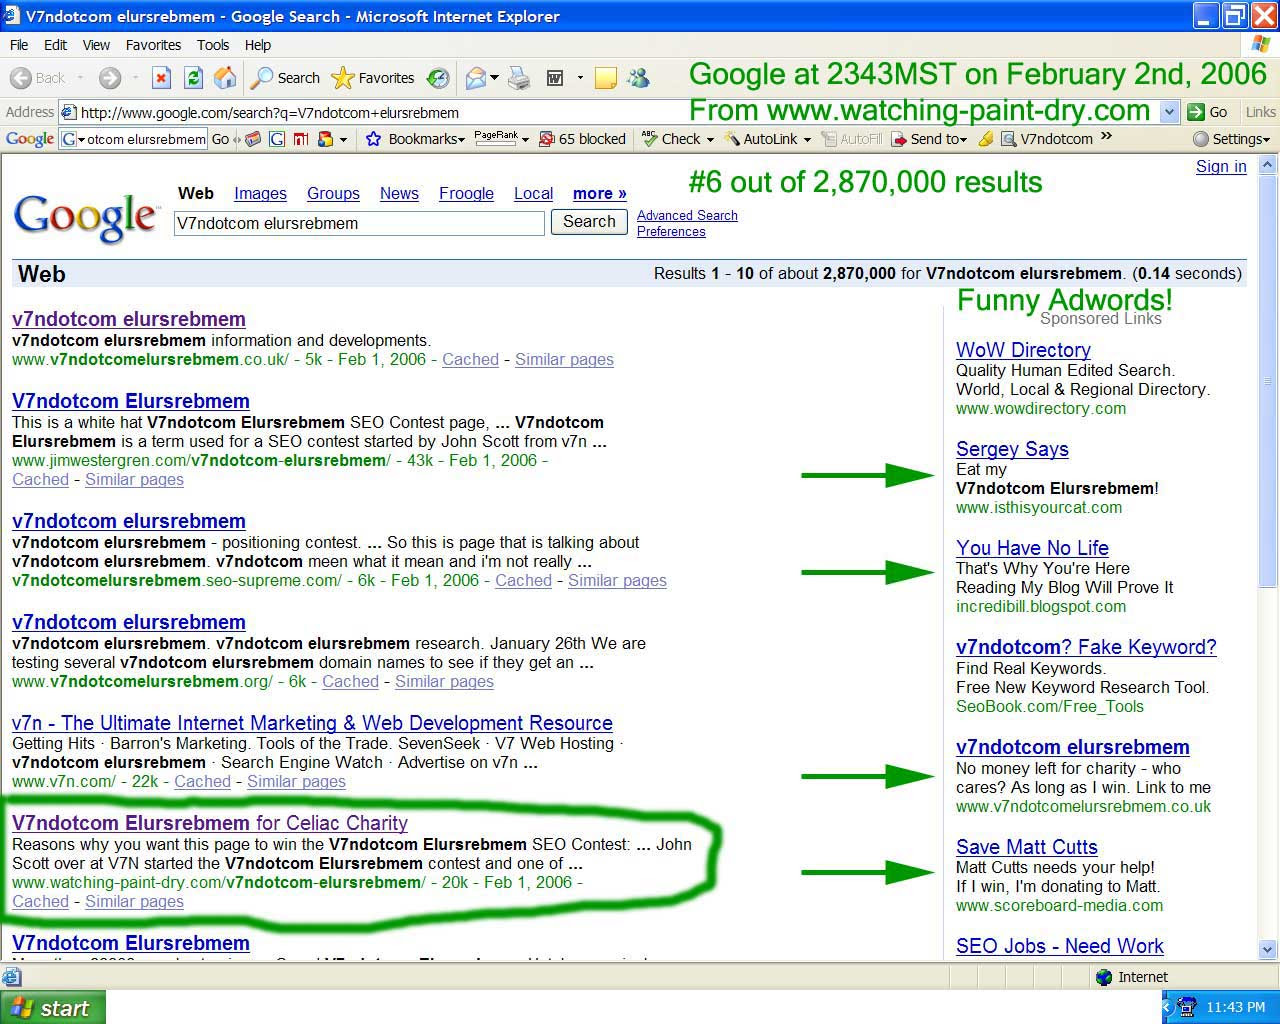 some really funny Adwords